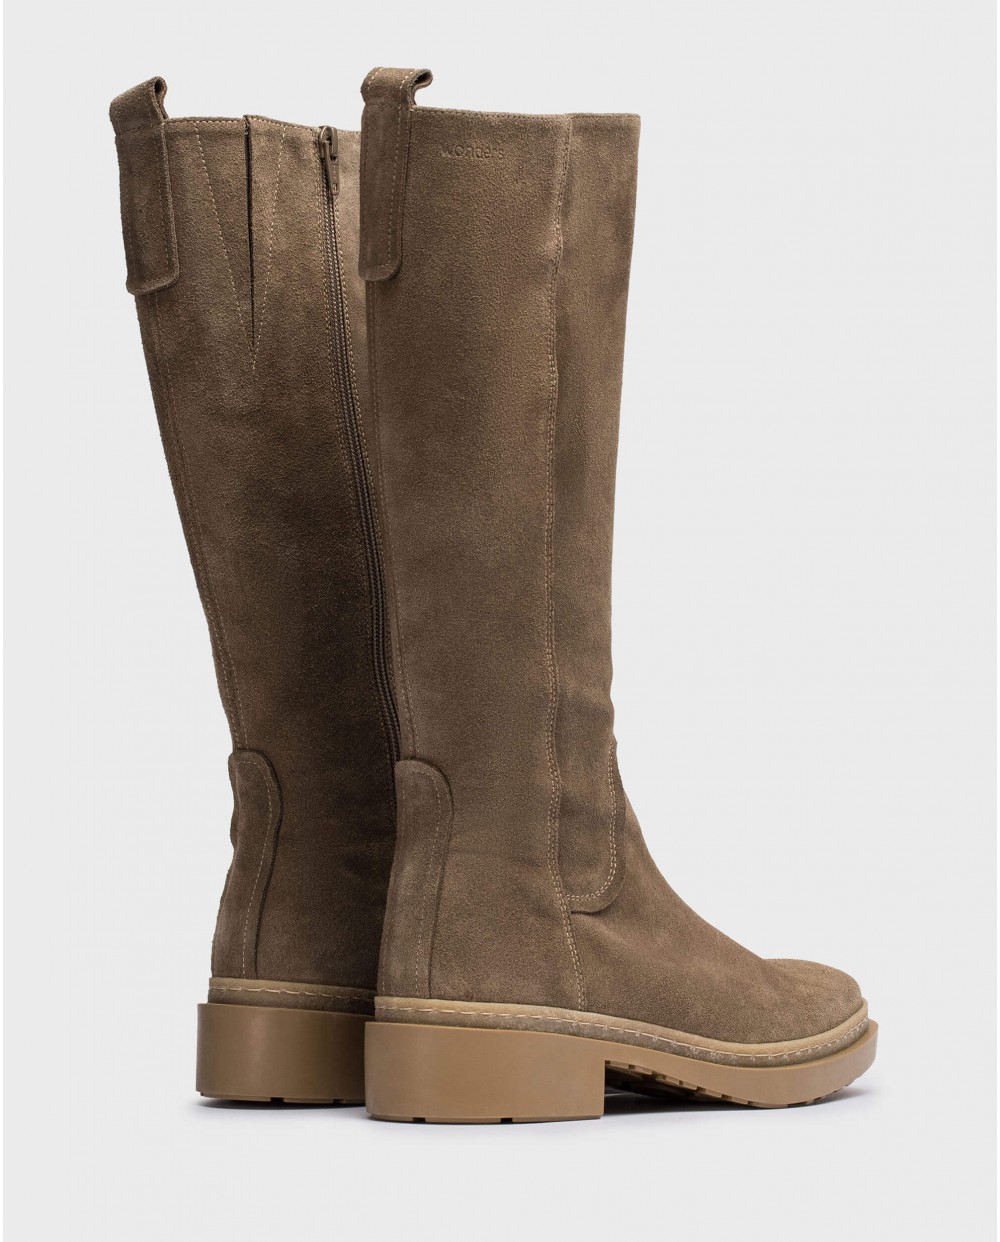 Wonders-Boots-Brown ROCO boot